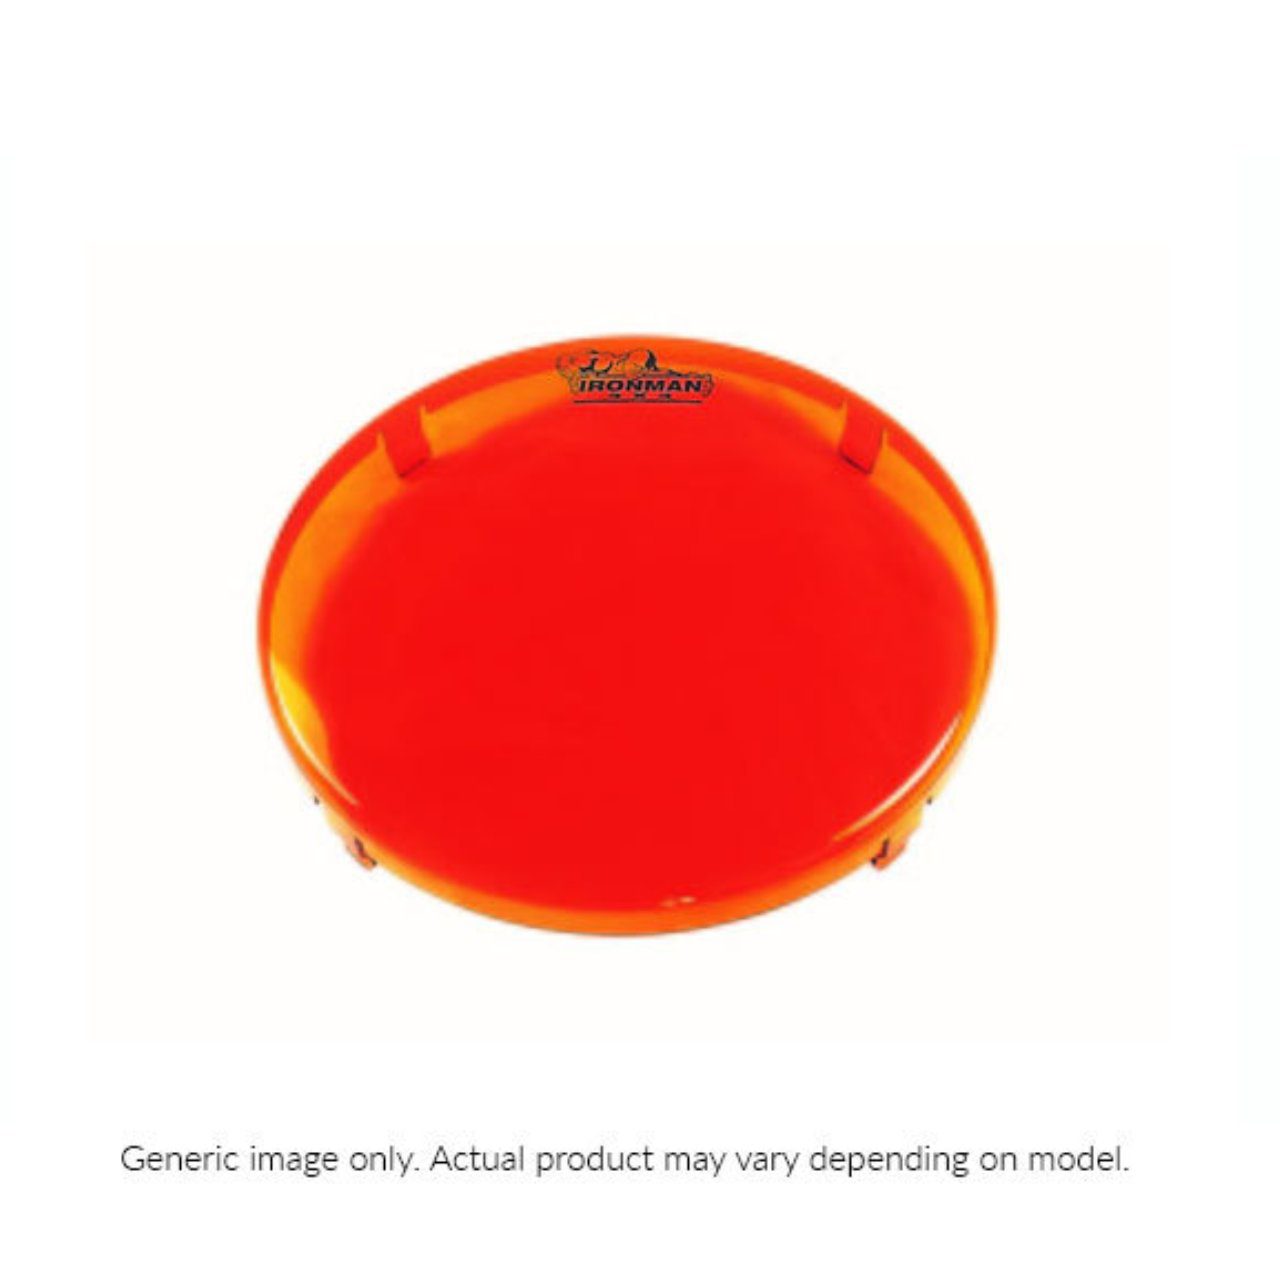 7″ COMET AMBER LIGHT COVERS